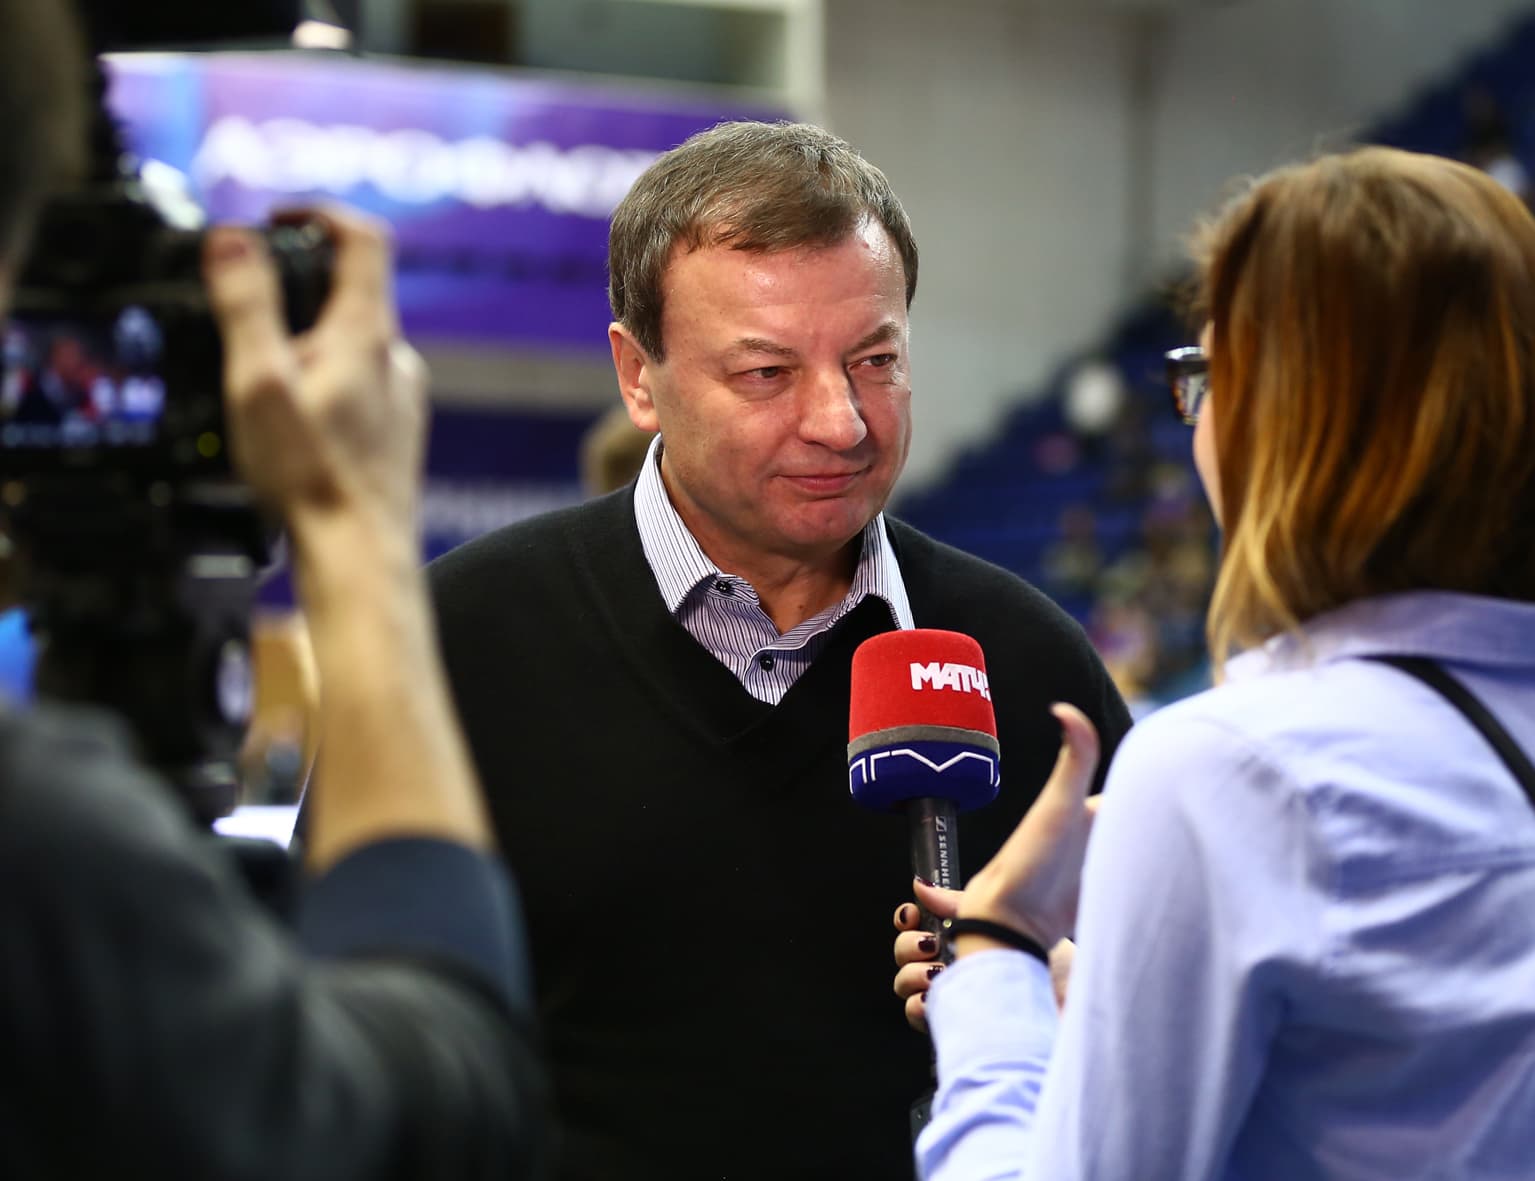 Sergey Kuschenko: This Was One Of The Best Weekends In League History